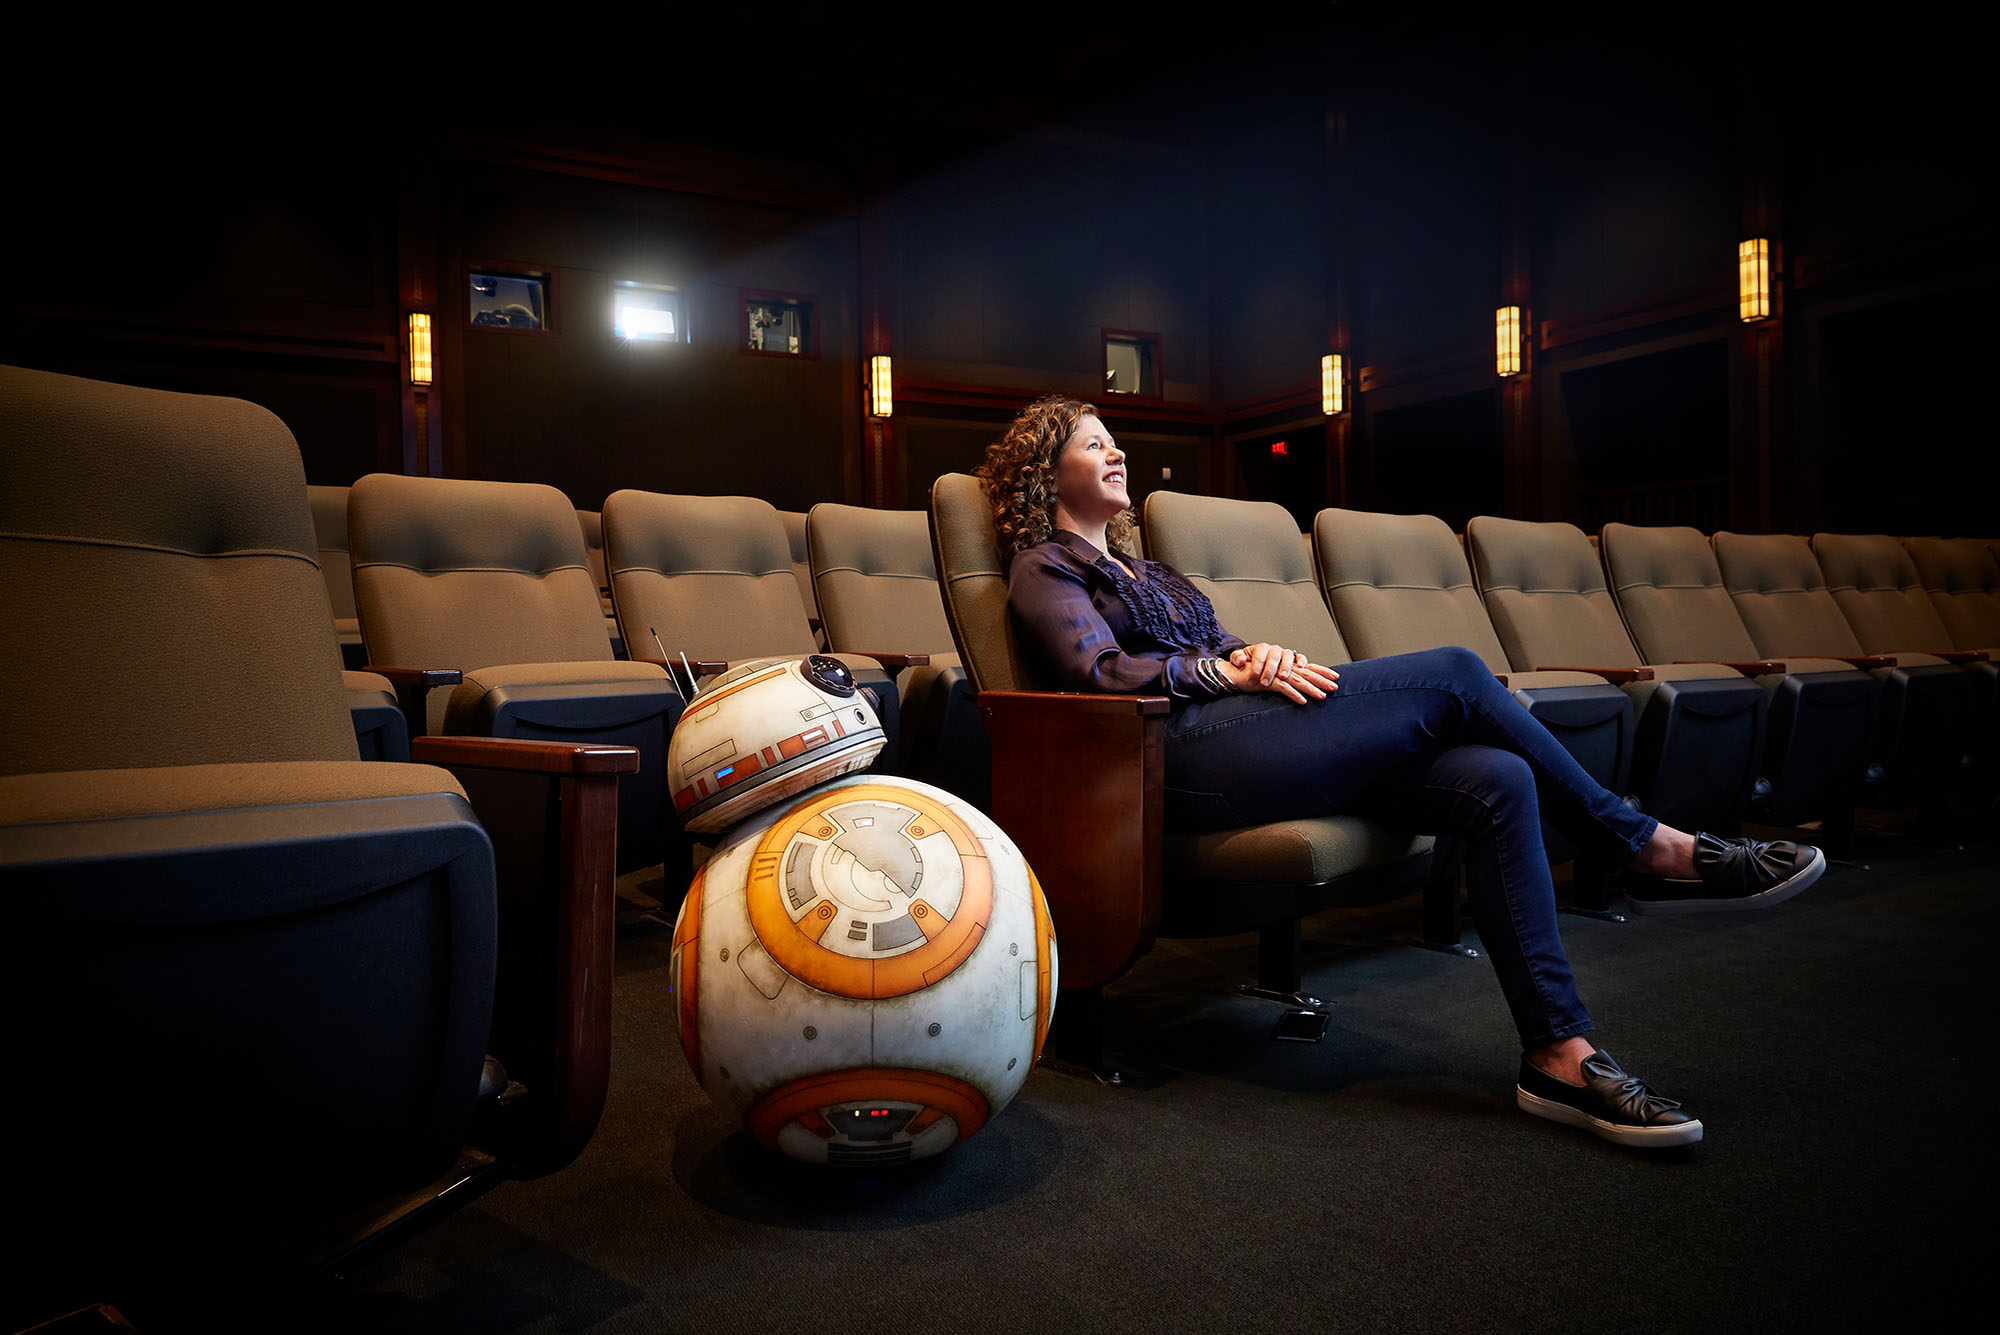 Janet Lewin helps filmmakers develop the special effects technology needed to bring characters—like the Star Wars droid BB-8—to life on screen. Here Lewin and BB-8 sit in a cinema